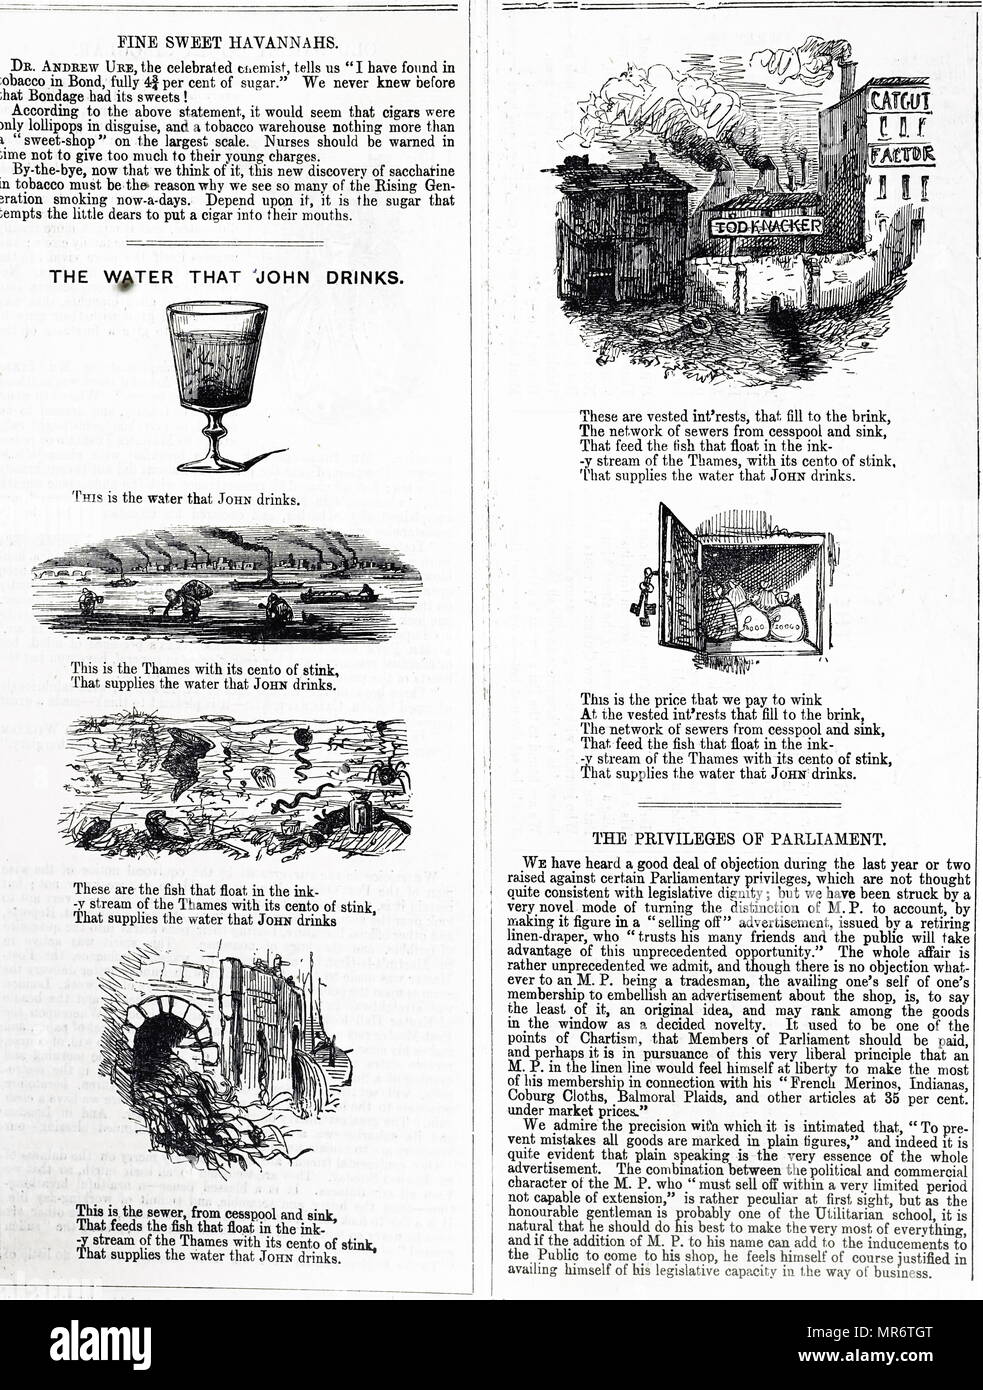 Article explaining where Londoners' get their water from. Dated 19th century Stock Photo